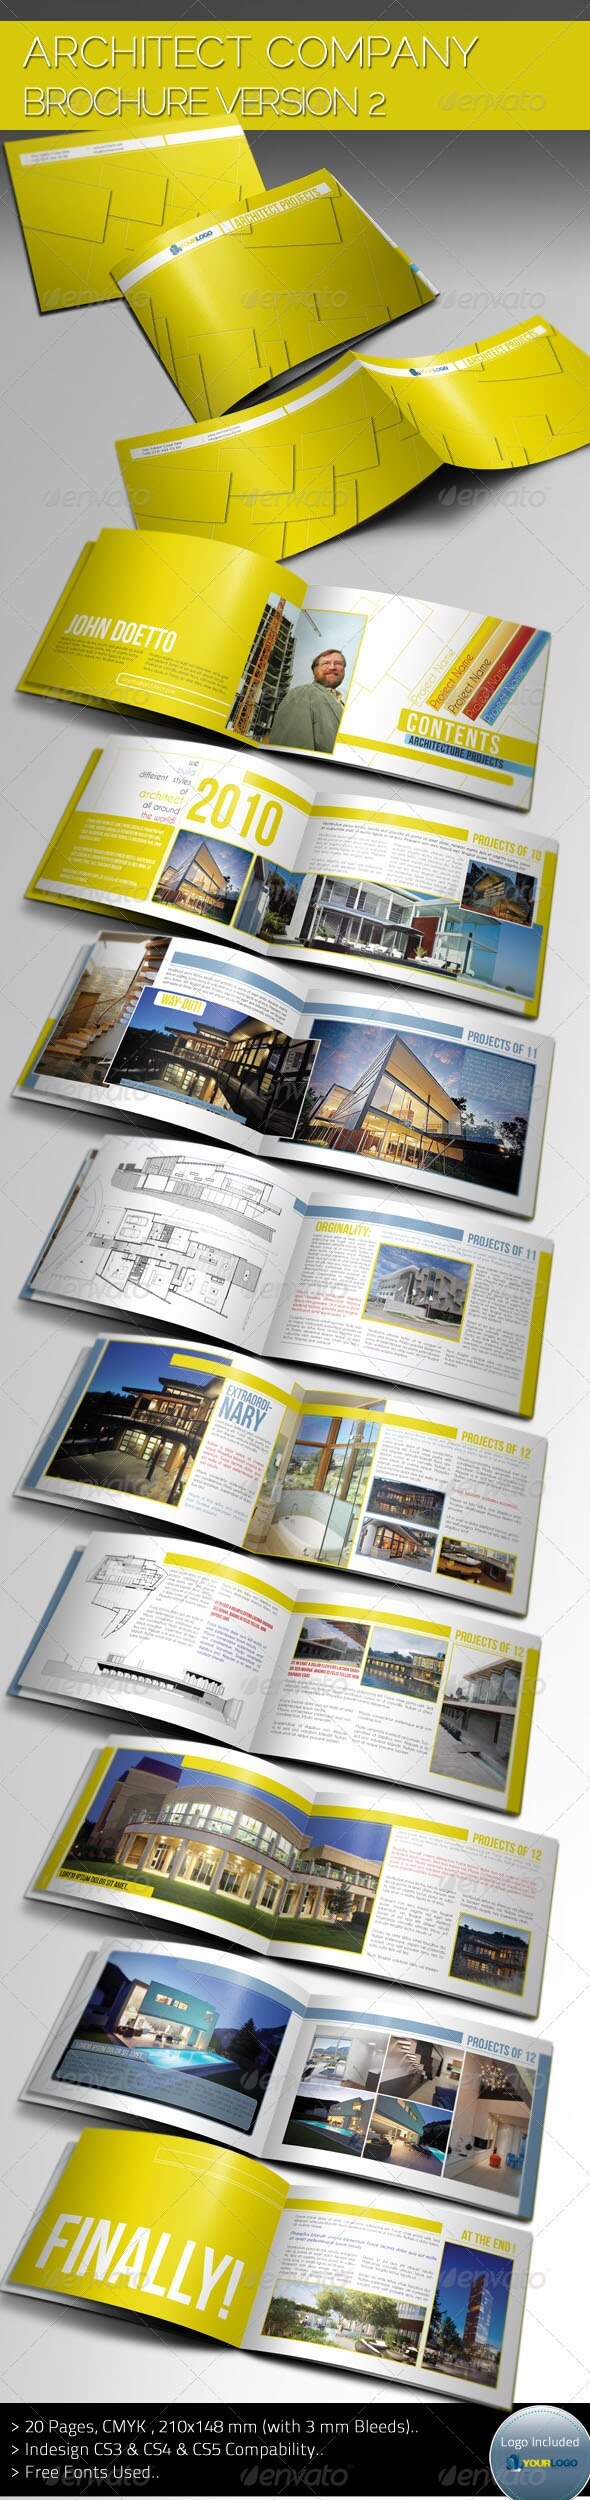 Indesign Brochure Template Graphics, Designs & Templates Regarding Architecture Brochure Templates Free Download